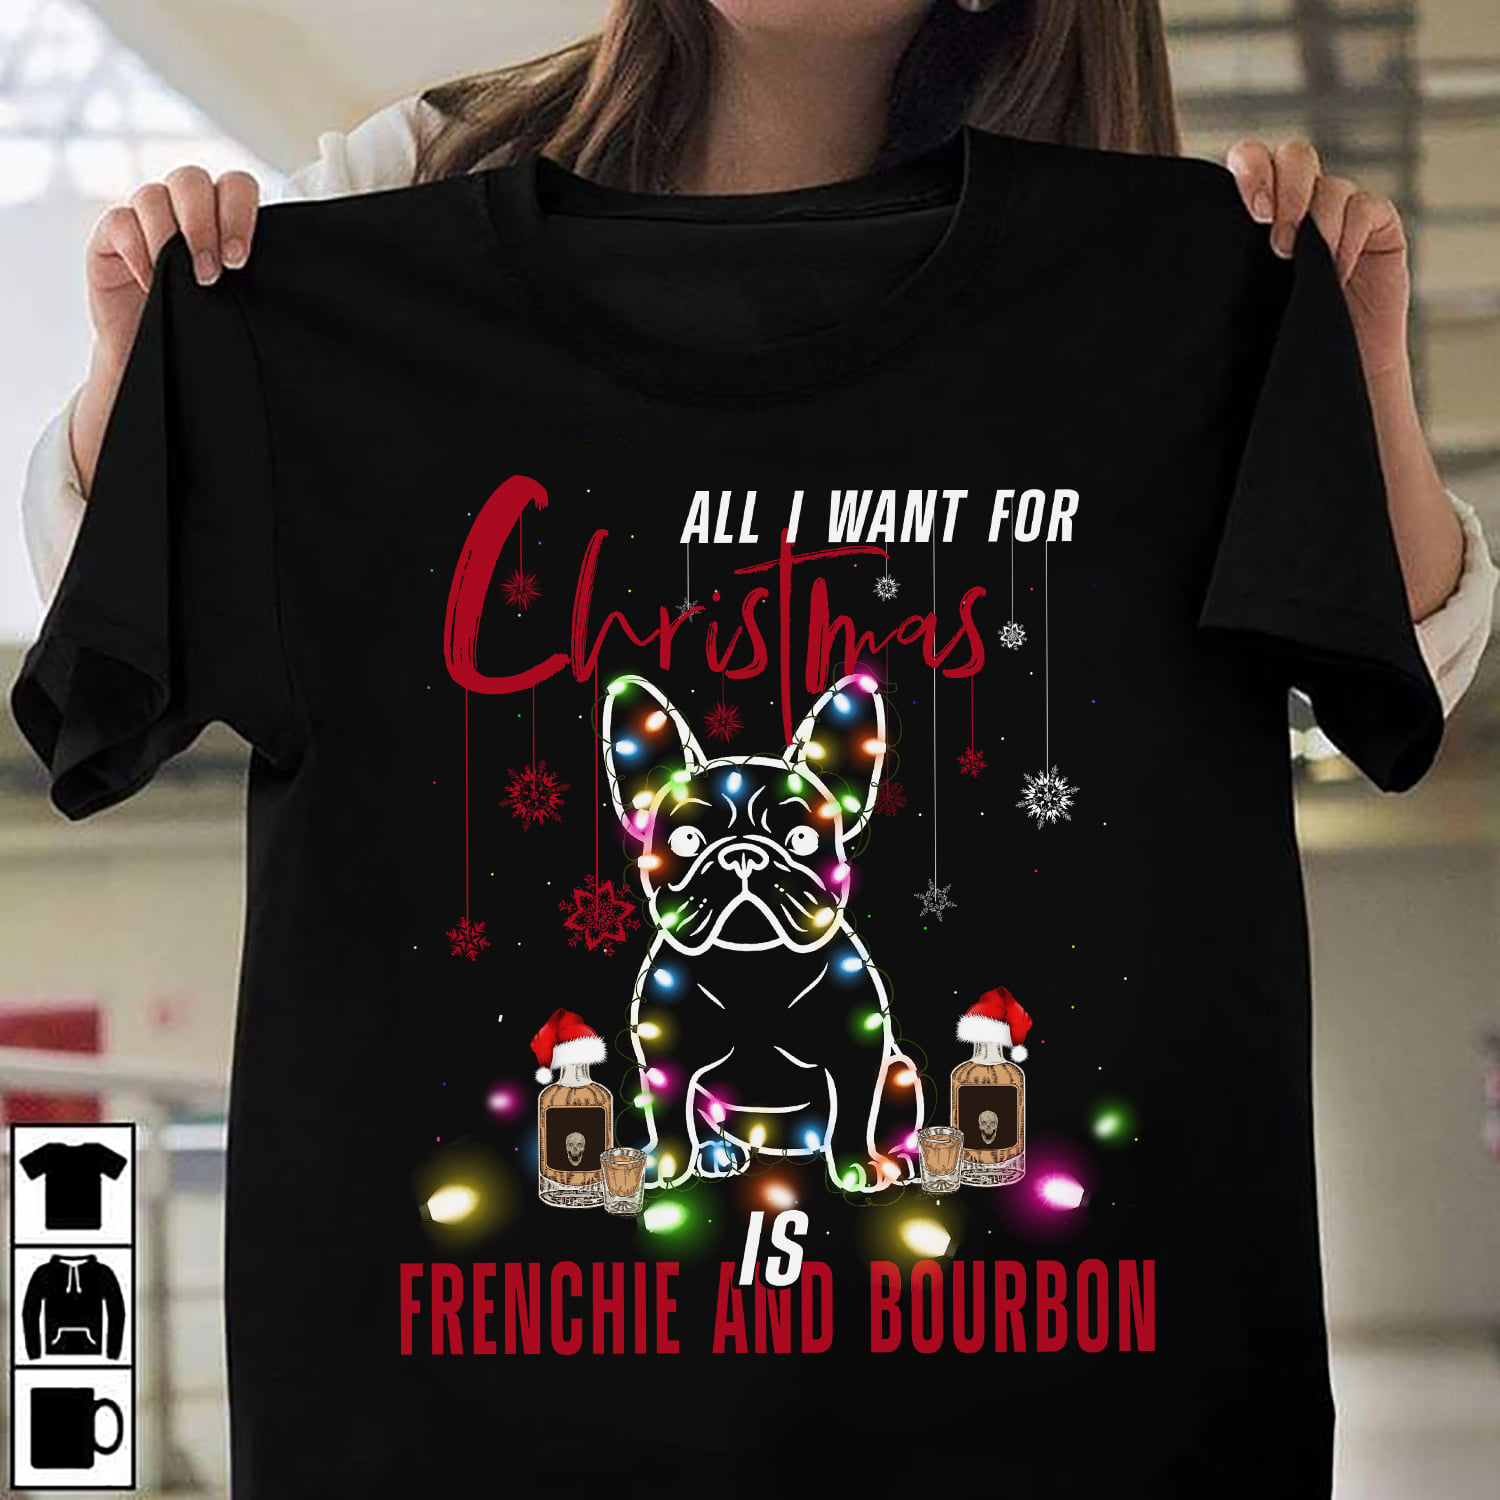 All I need for Christmas is Frenchie and Bourbon - Bourbon wine for Christmas, Christmas day ugly sweater